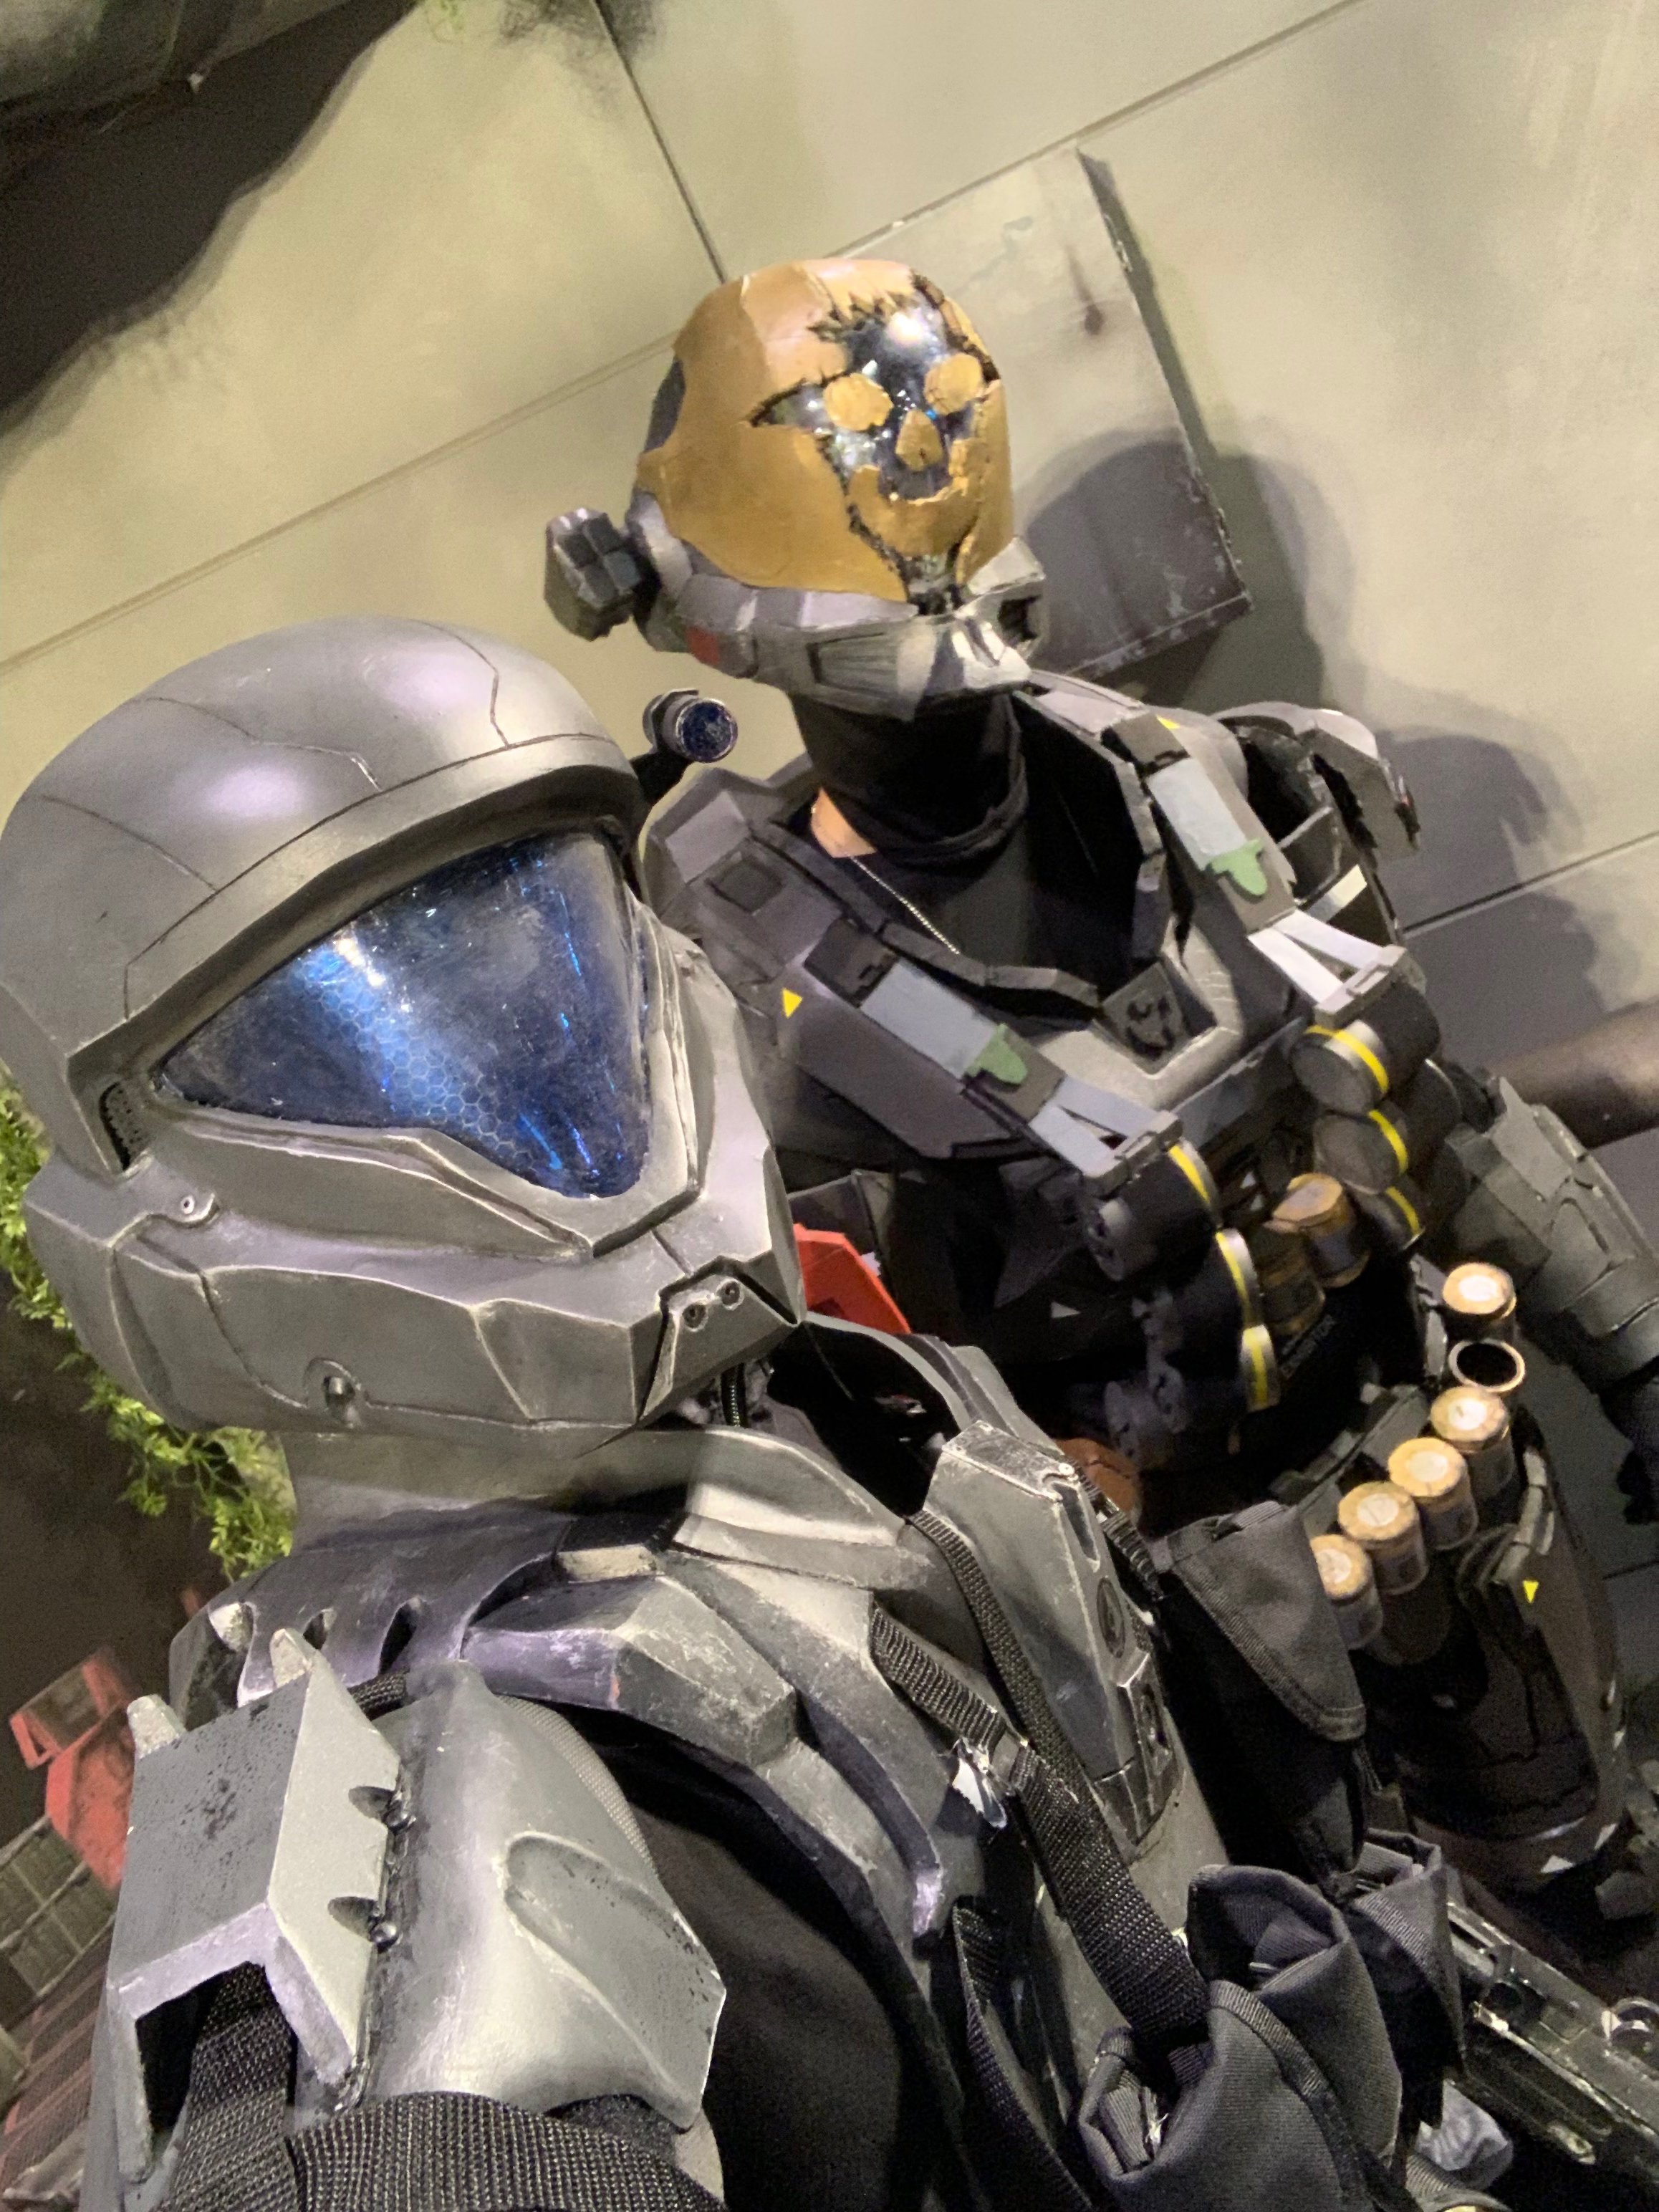 Halo 2 Anniversary ODST - A return to form | Halo Costume and Prop ...